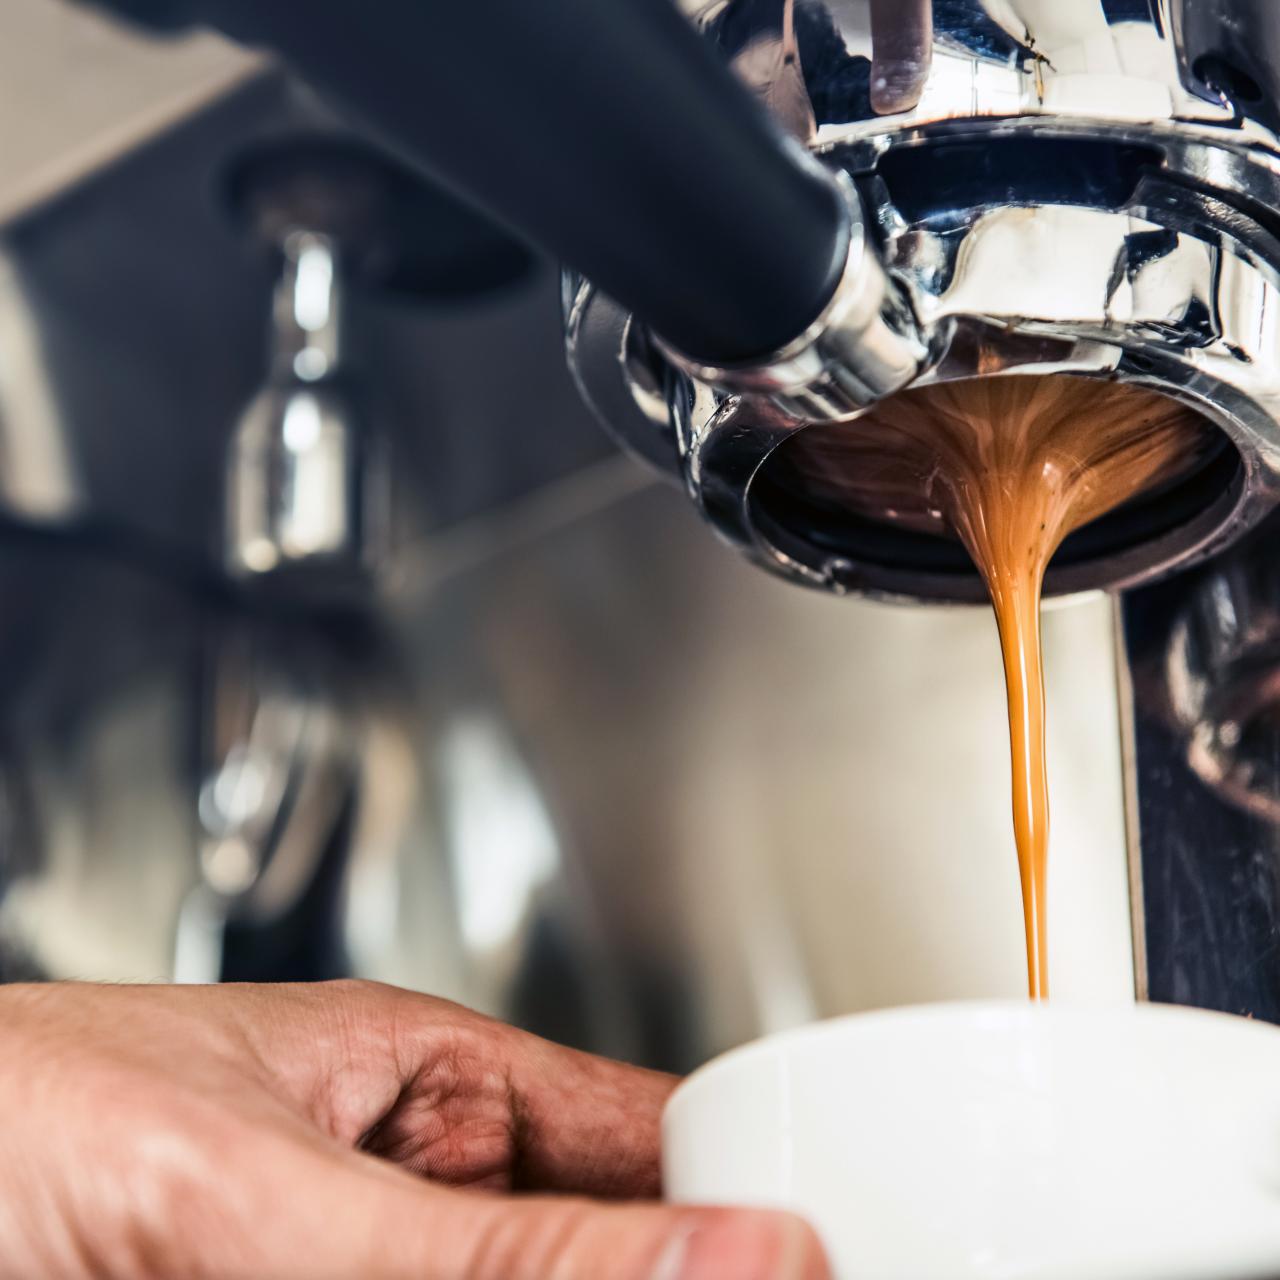 How To Make Coffee: Advice from Baristas and Experts